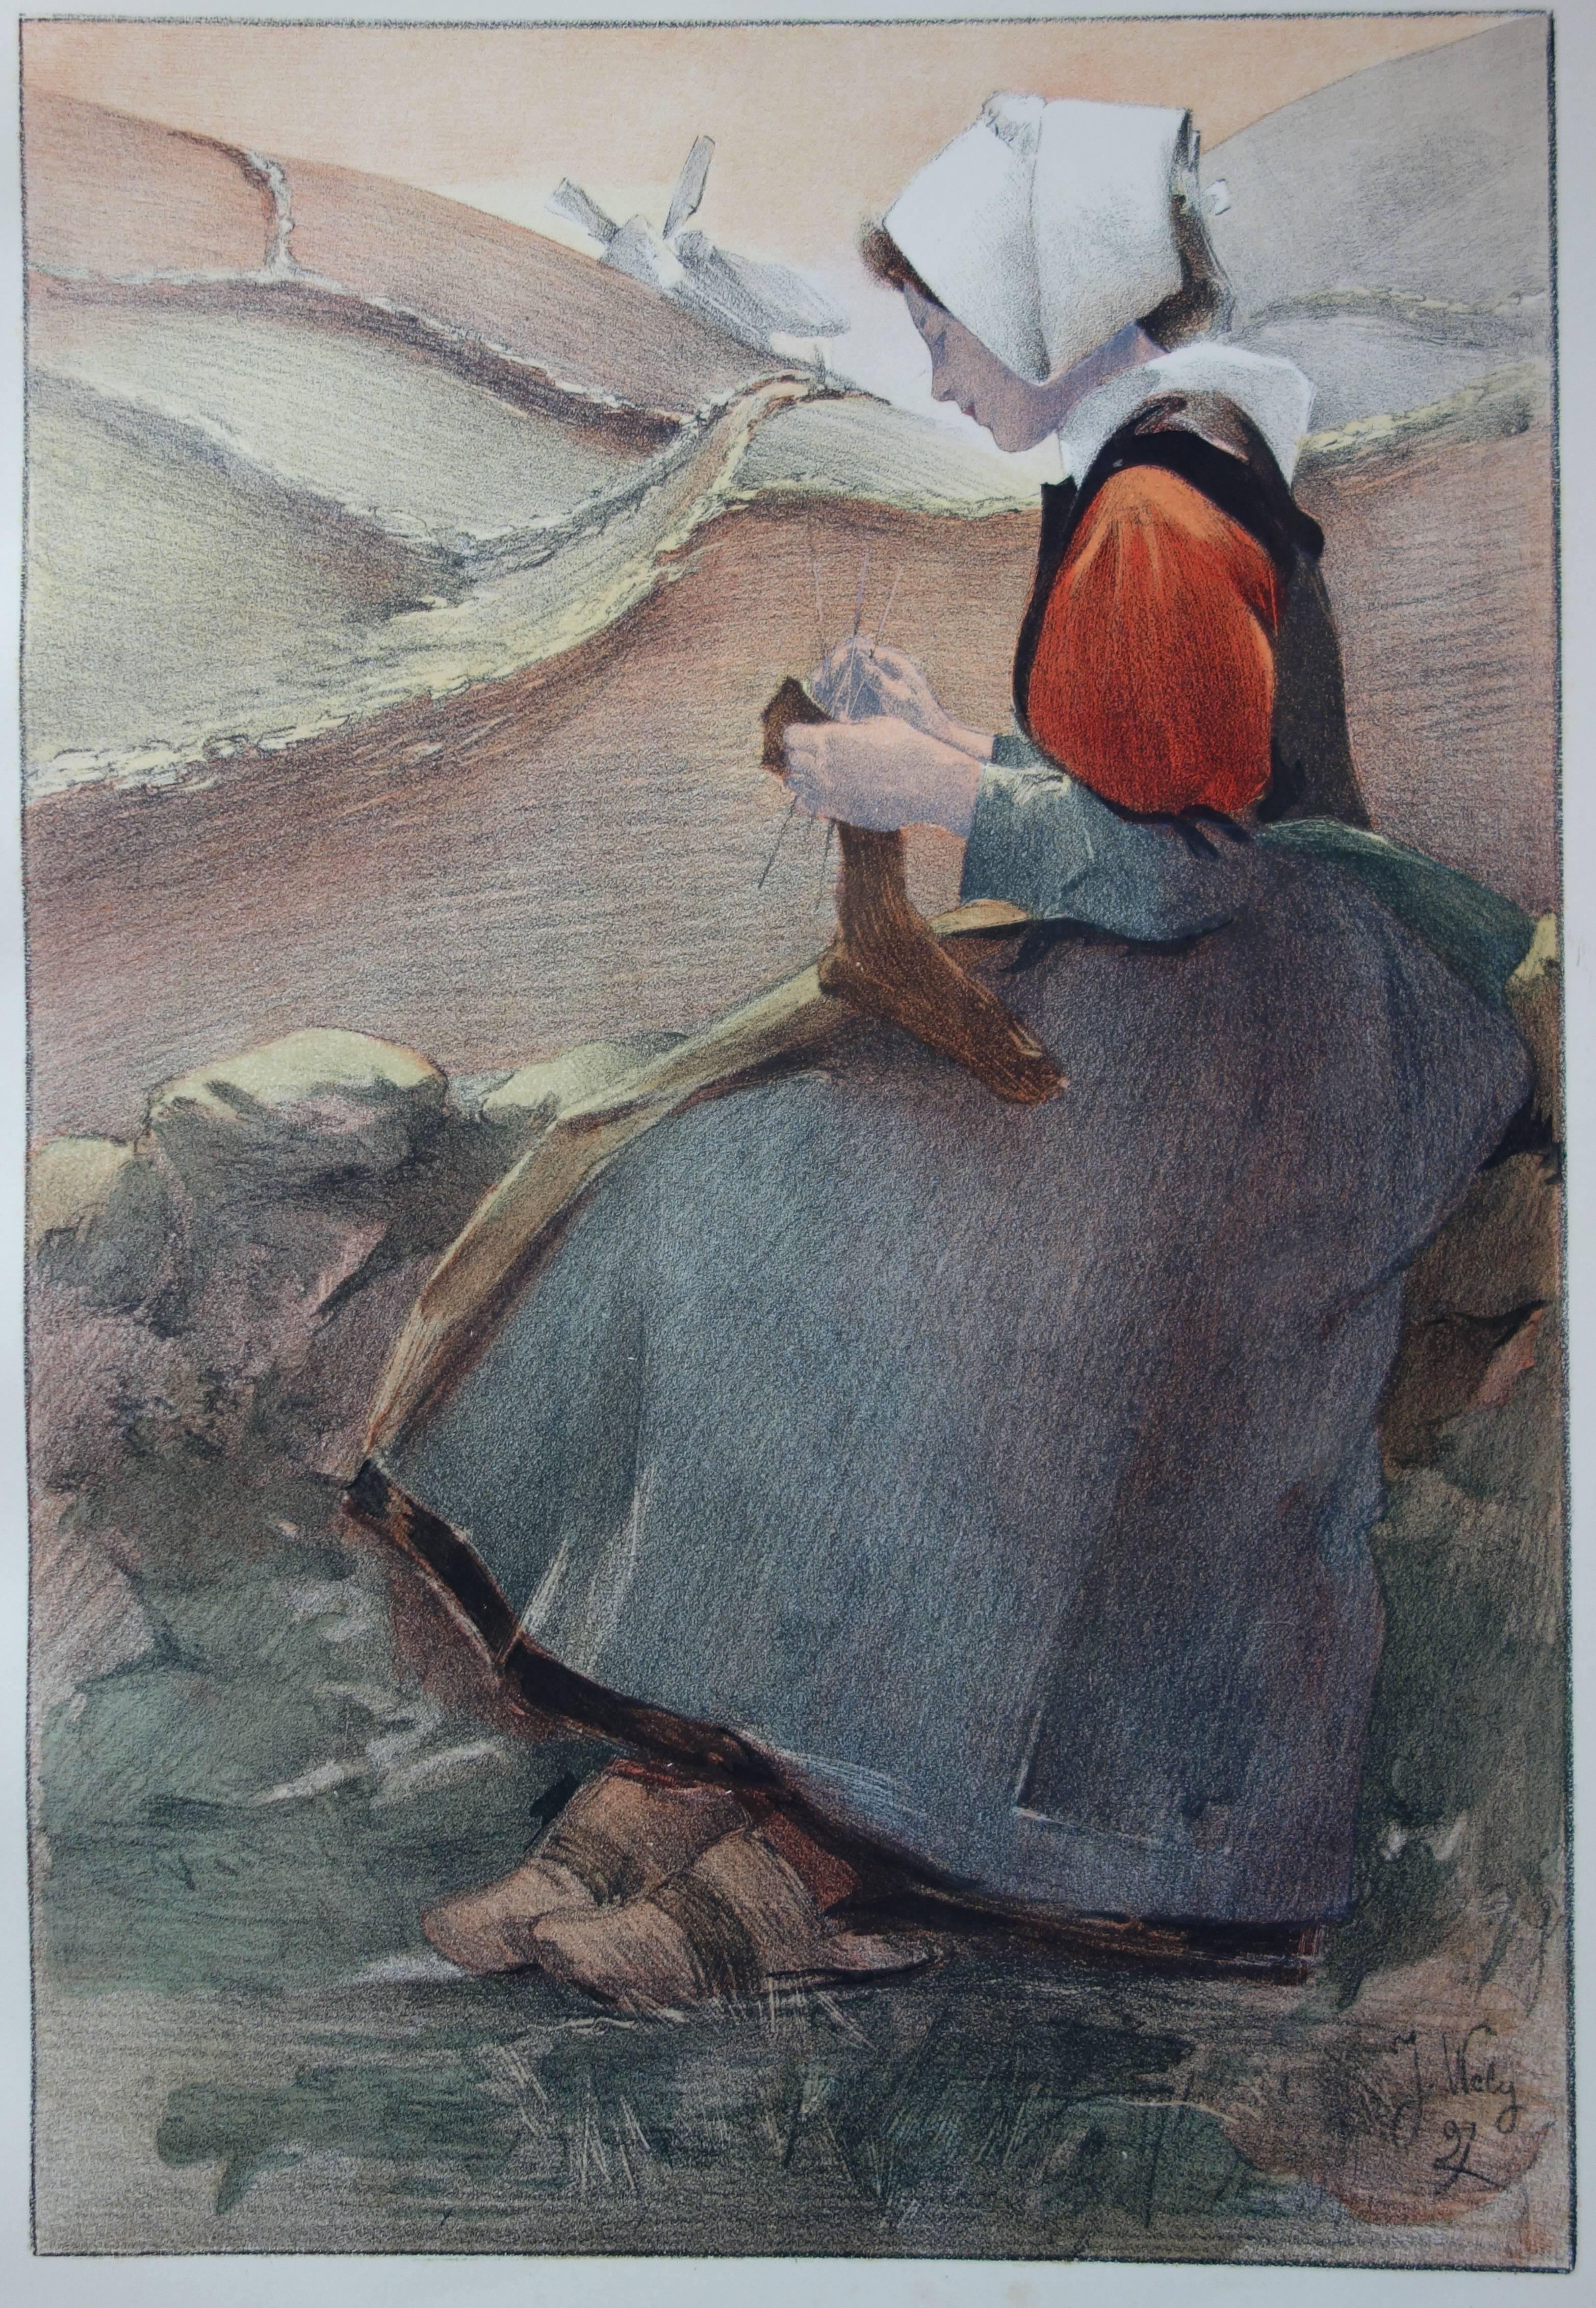 Jacques Wely Figurative Print - Woman in Traditional Dutch Costume - Original lithograph (1897/98)